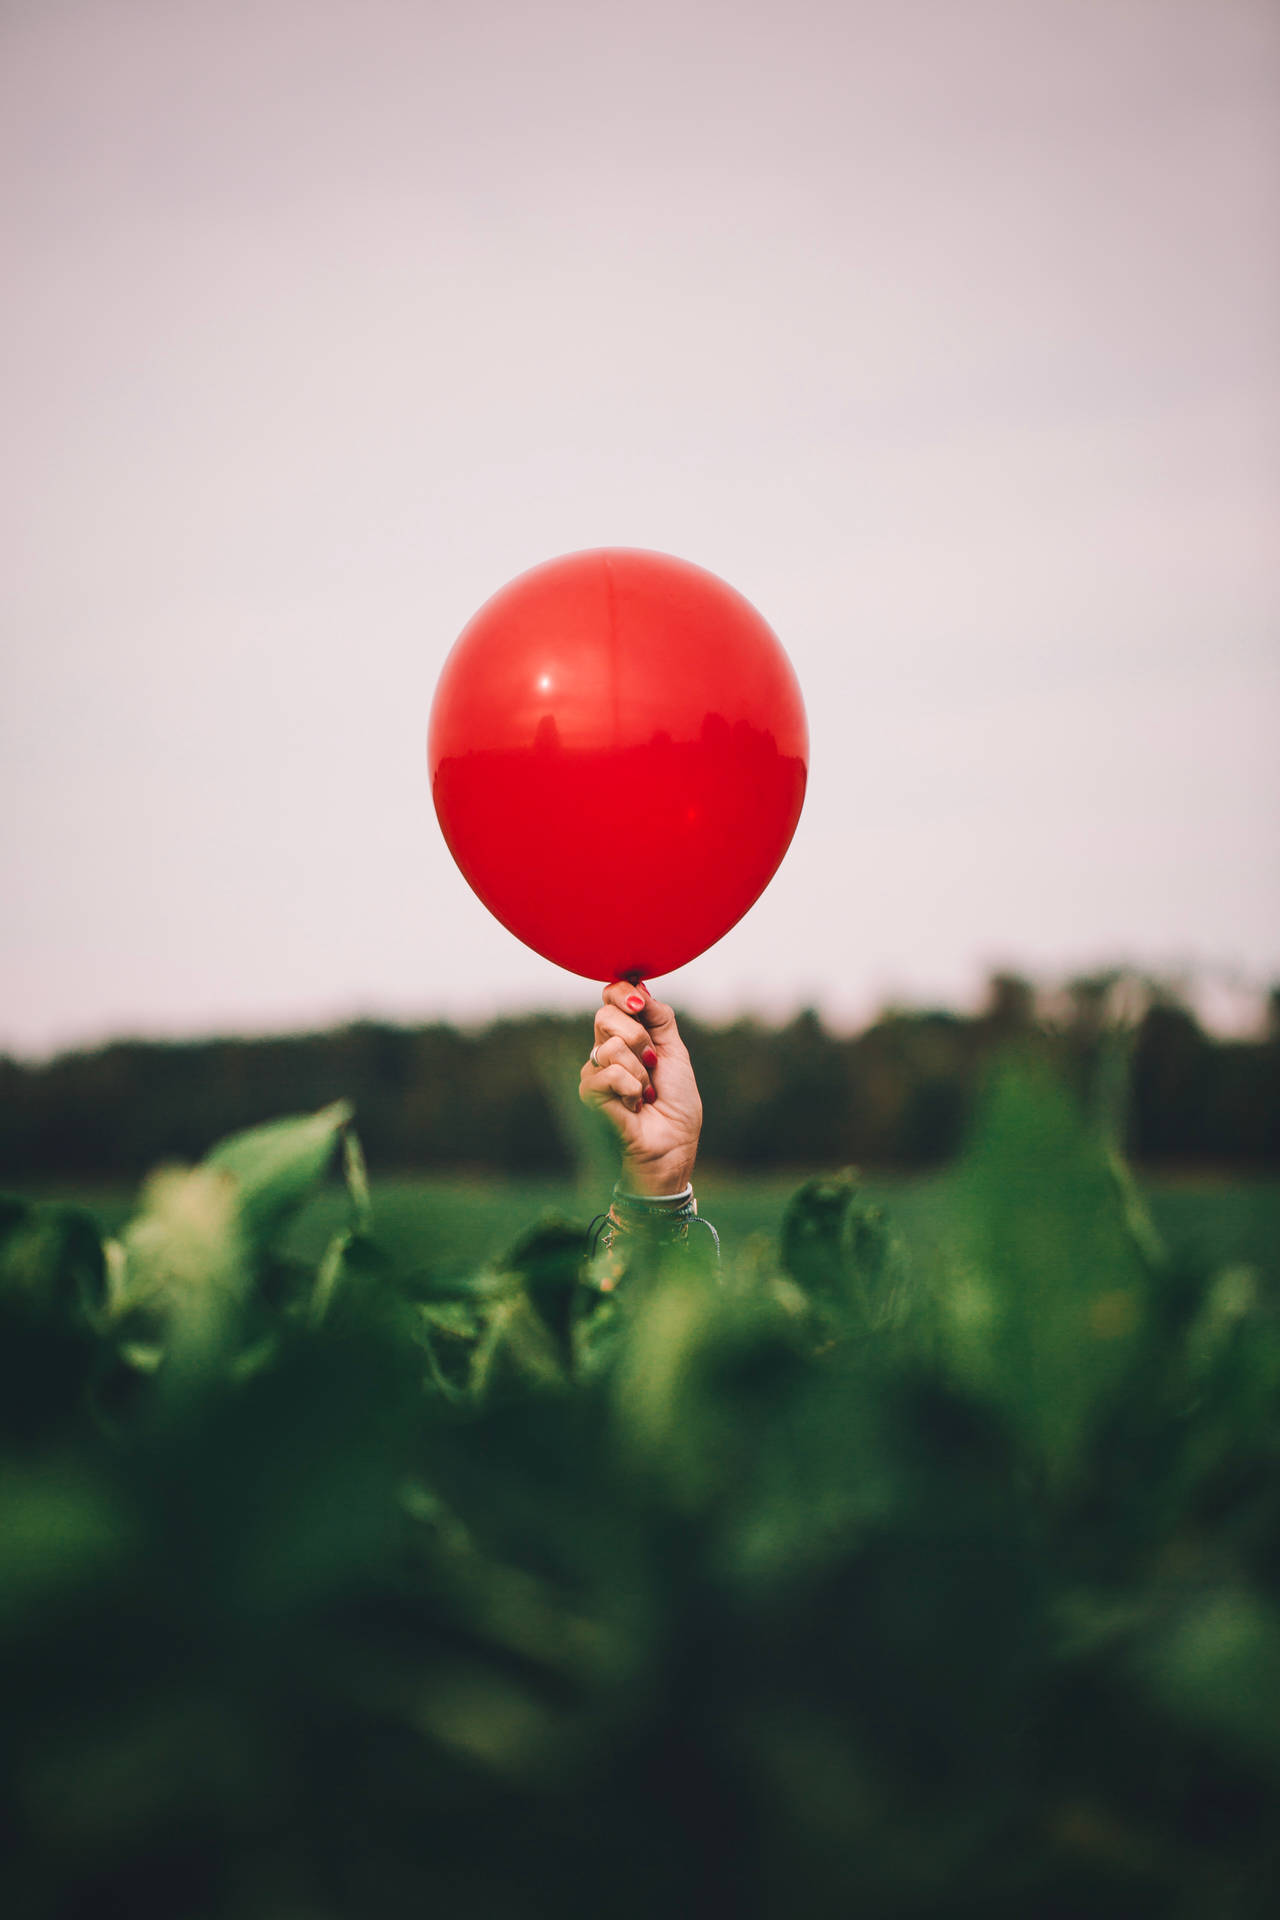 Red Glossy Balloon Over Green Plants Background